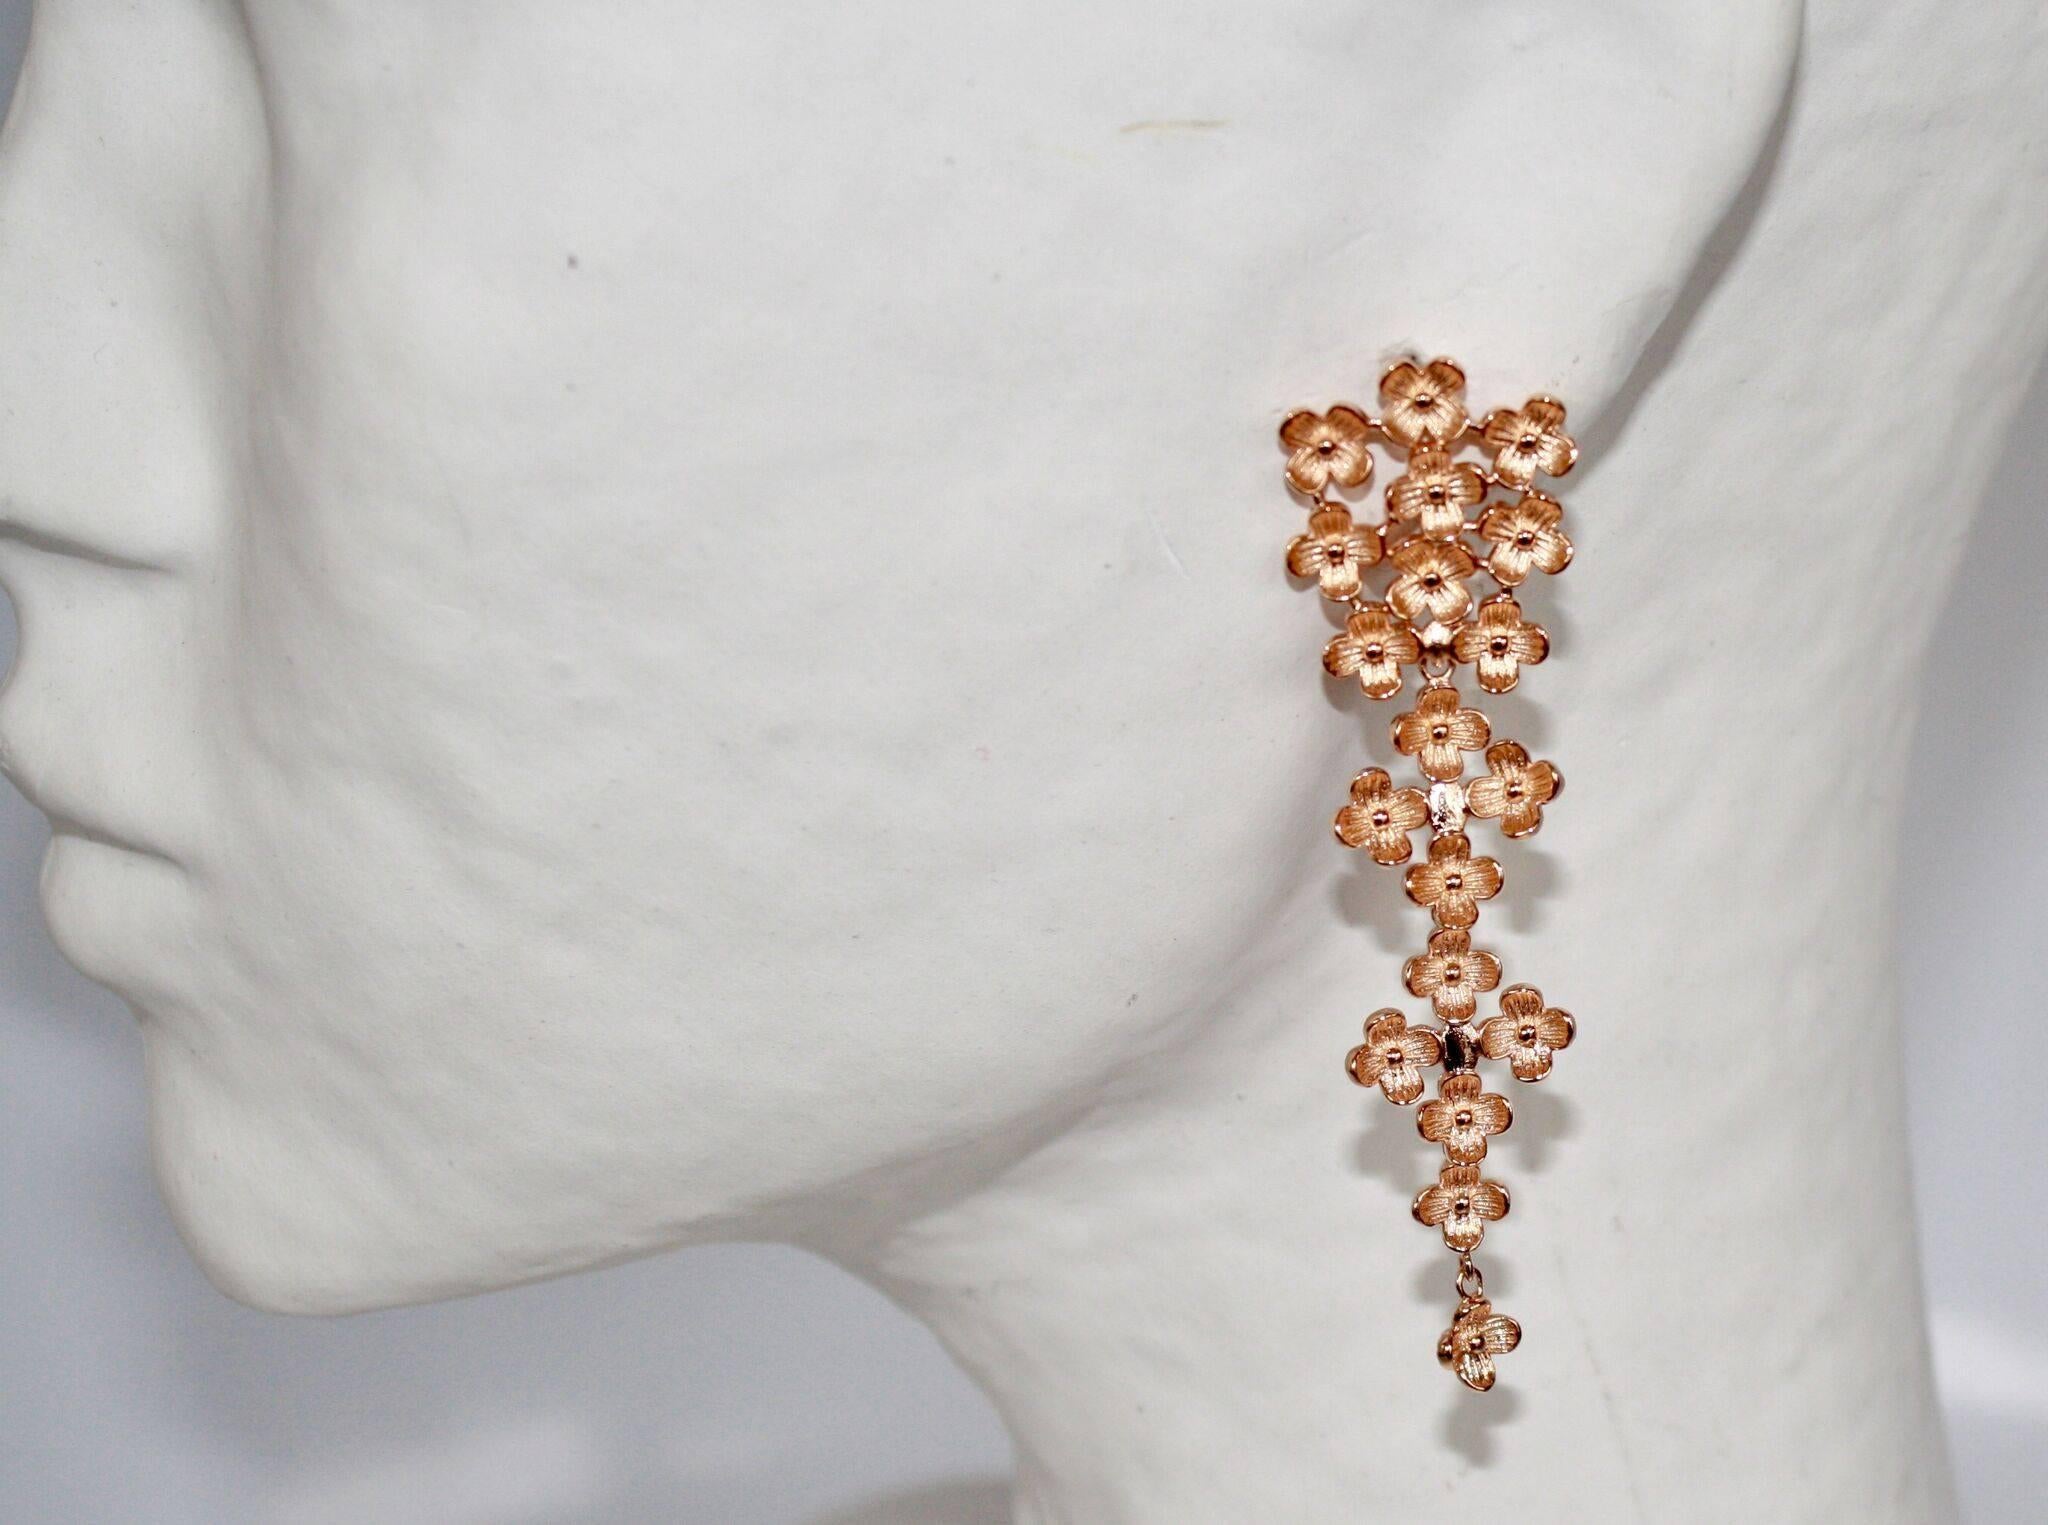 Daisy motif pierced statement earrings in rose gold from French designers Ambre et Louise. 